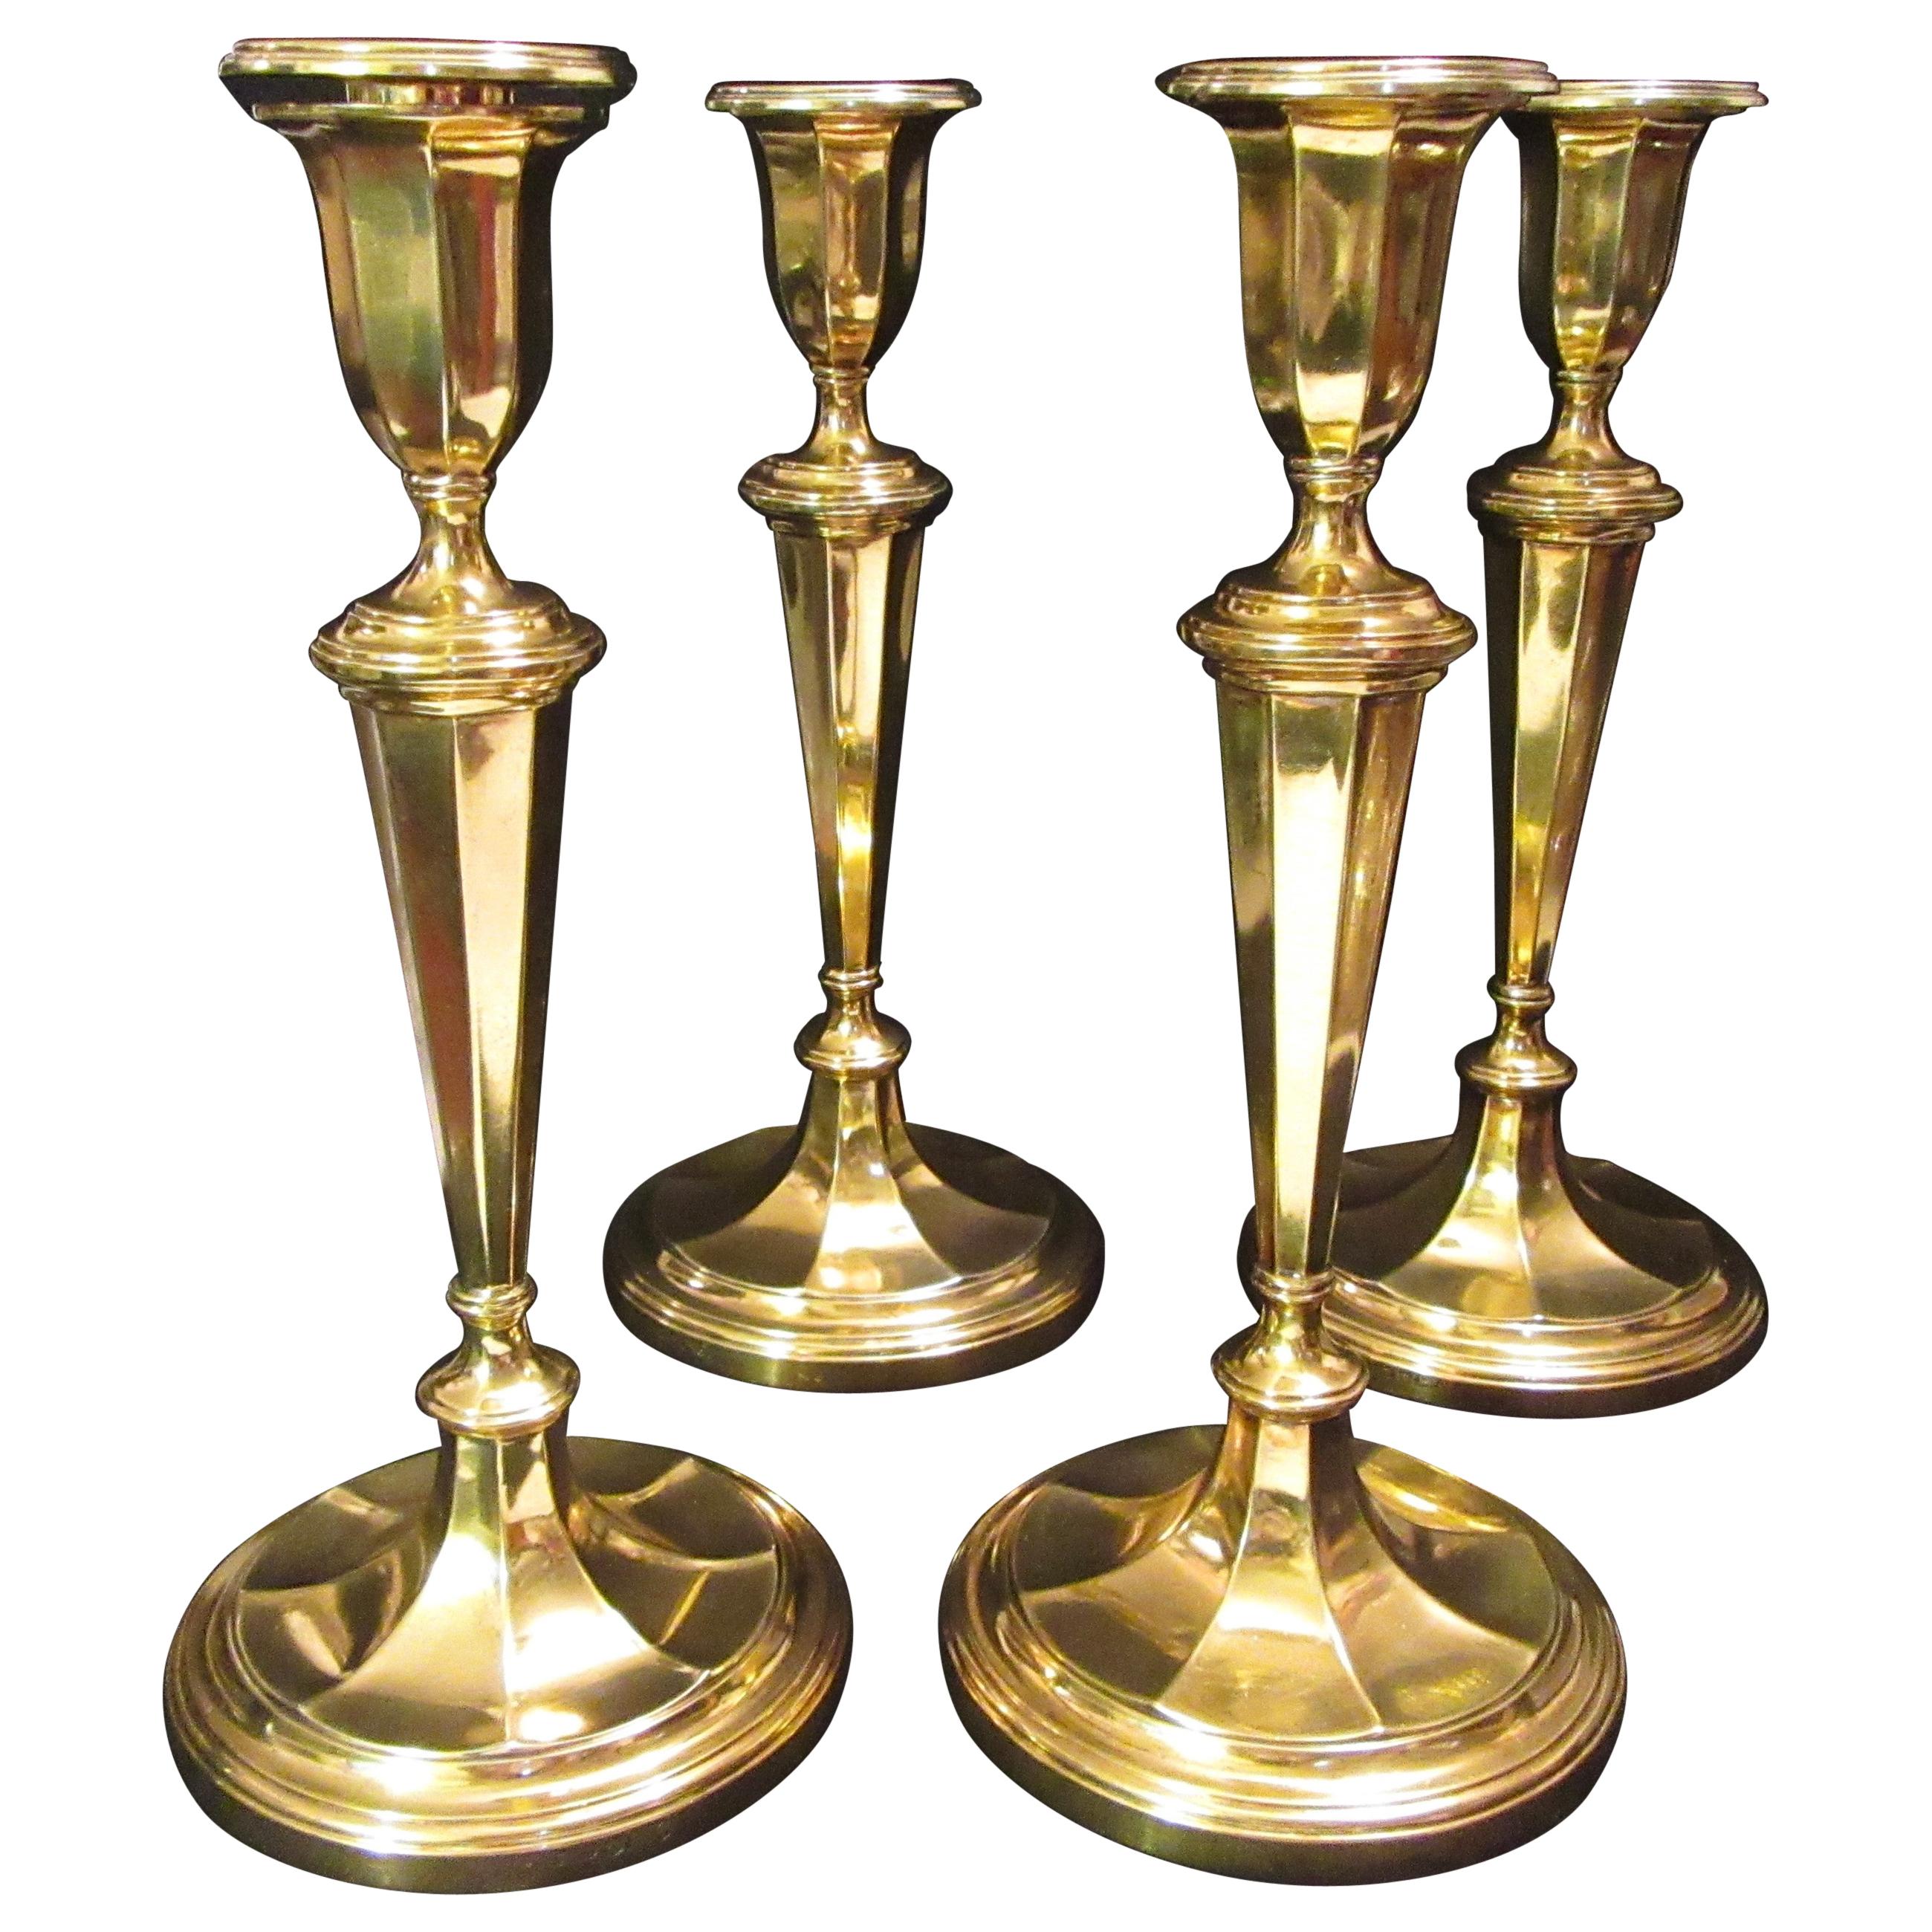 Tiffany & Co. Gold-Plated Sterling Silver Candlesticks